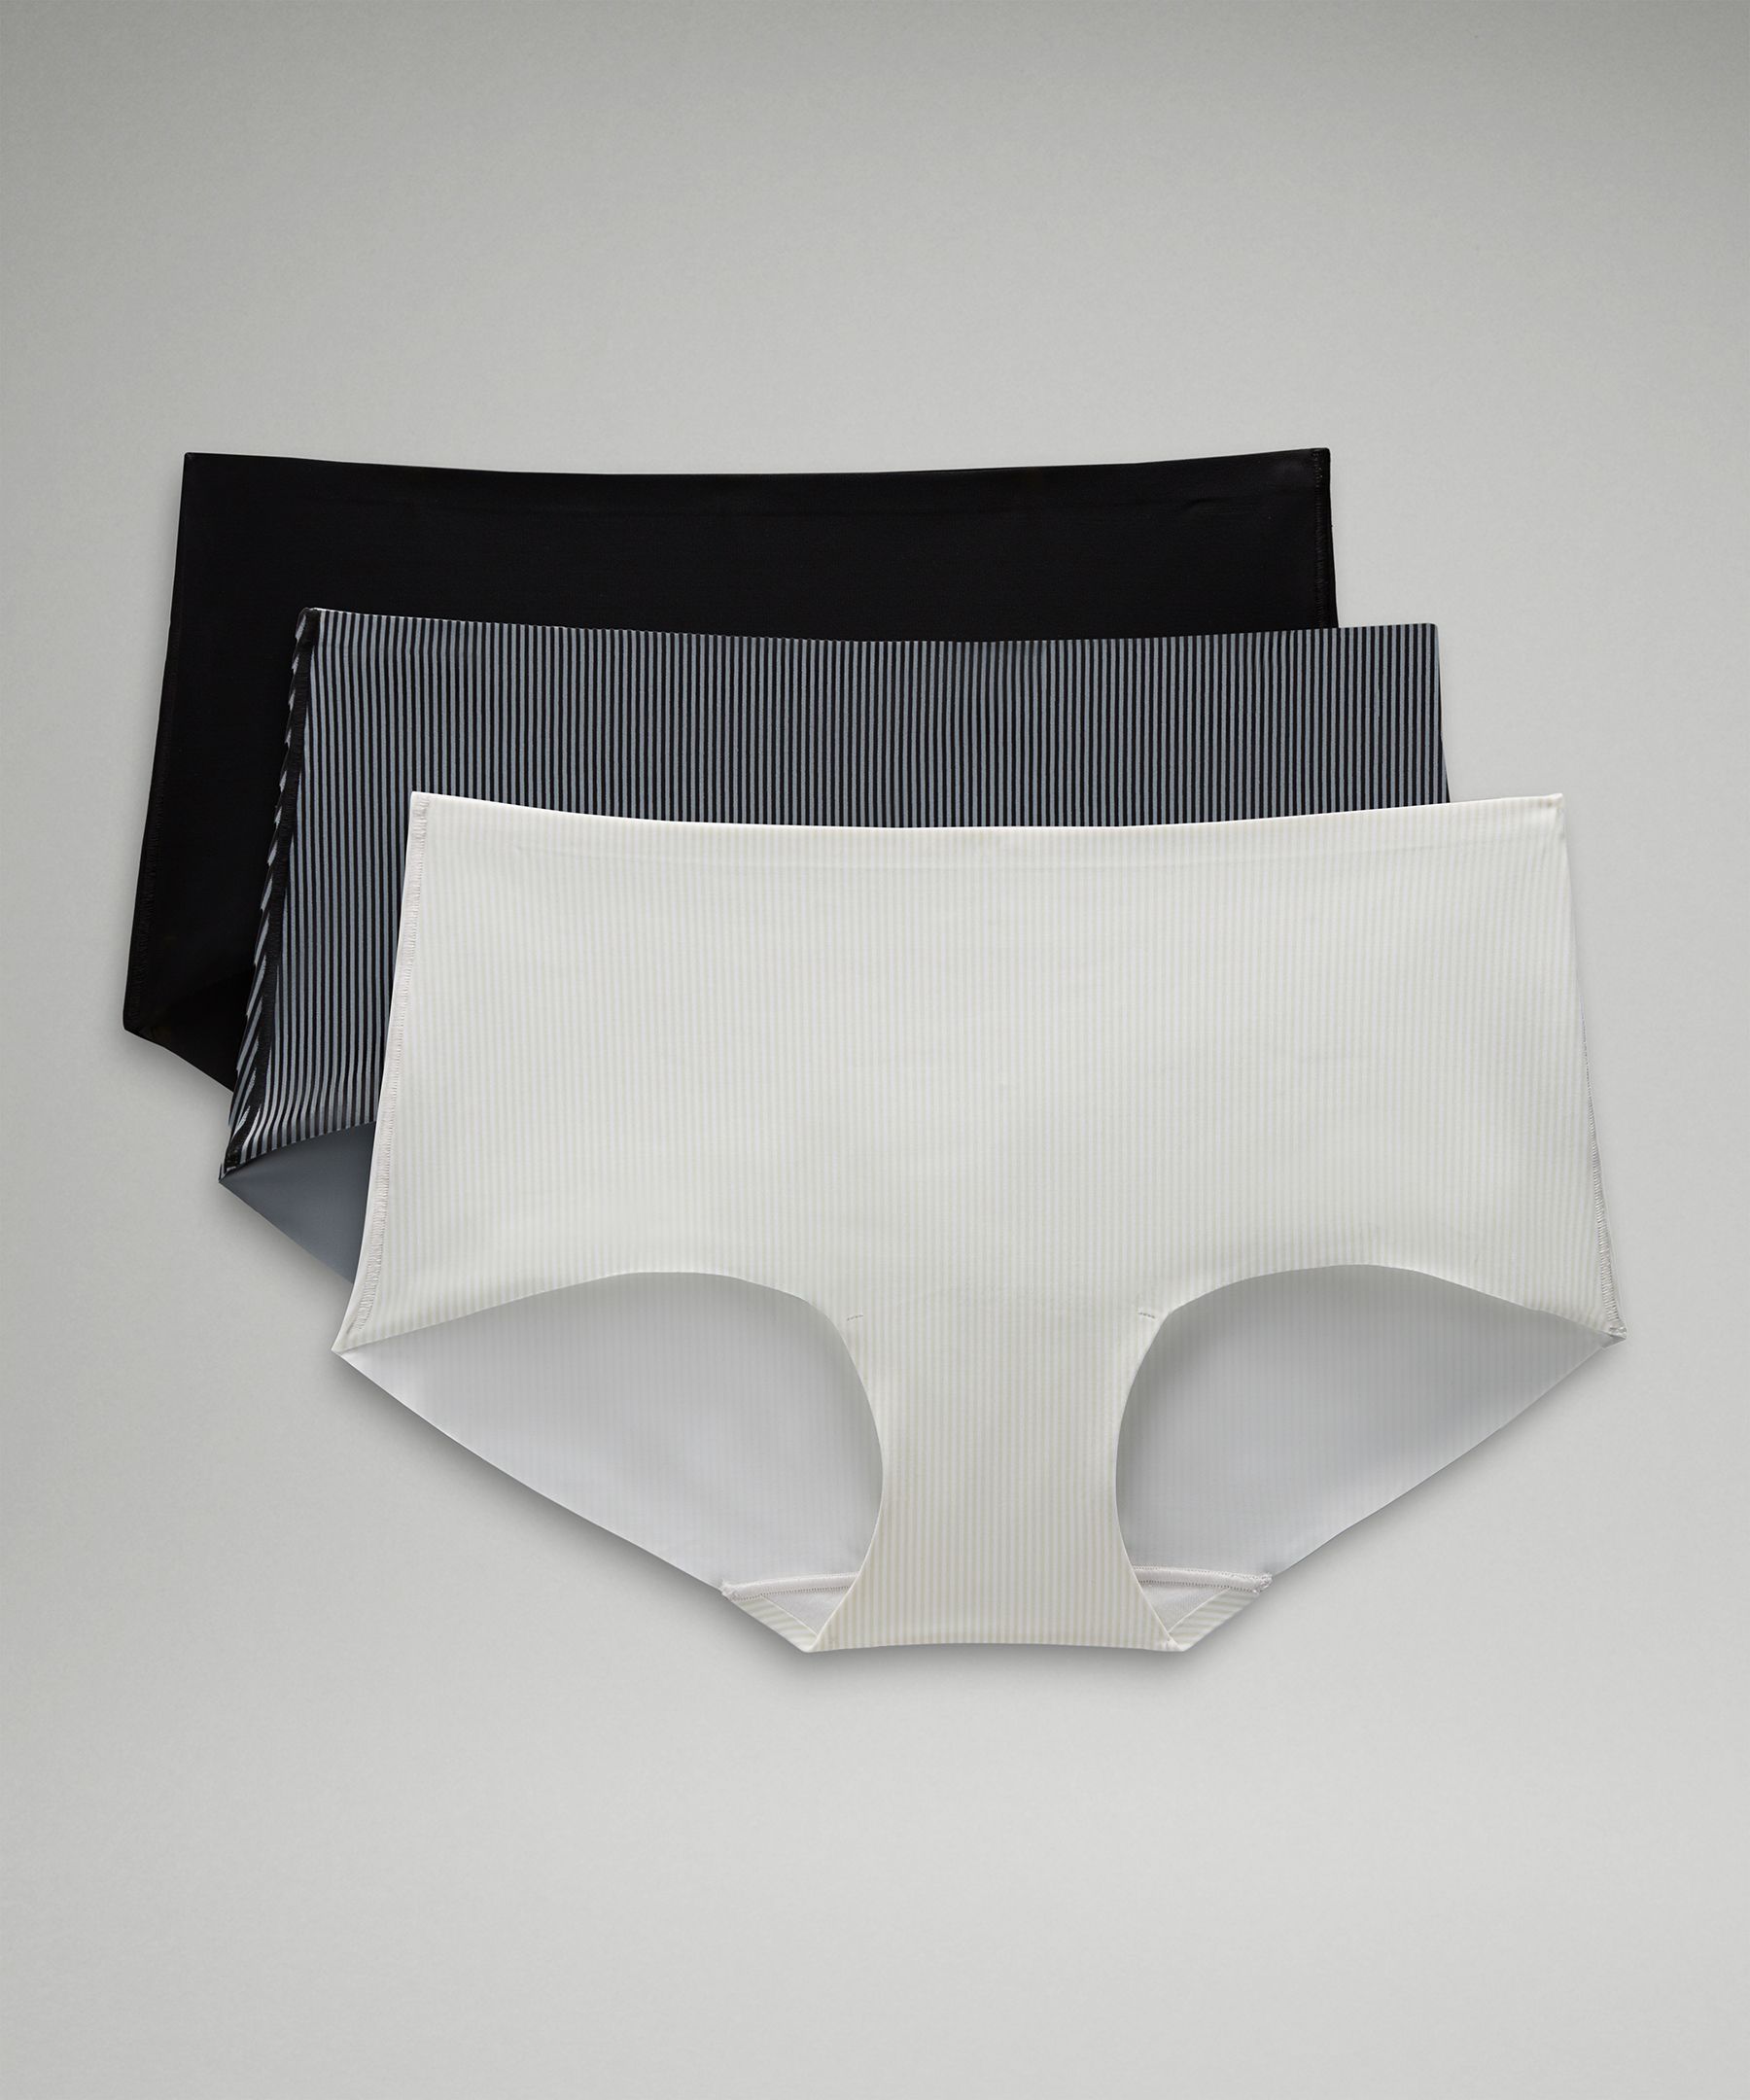 Lululemon's New Underwear for Serious Comfort and Support - New